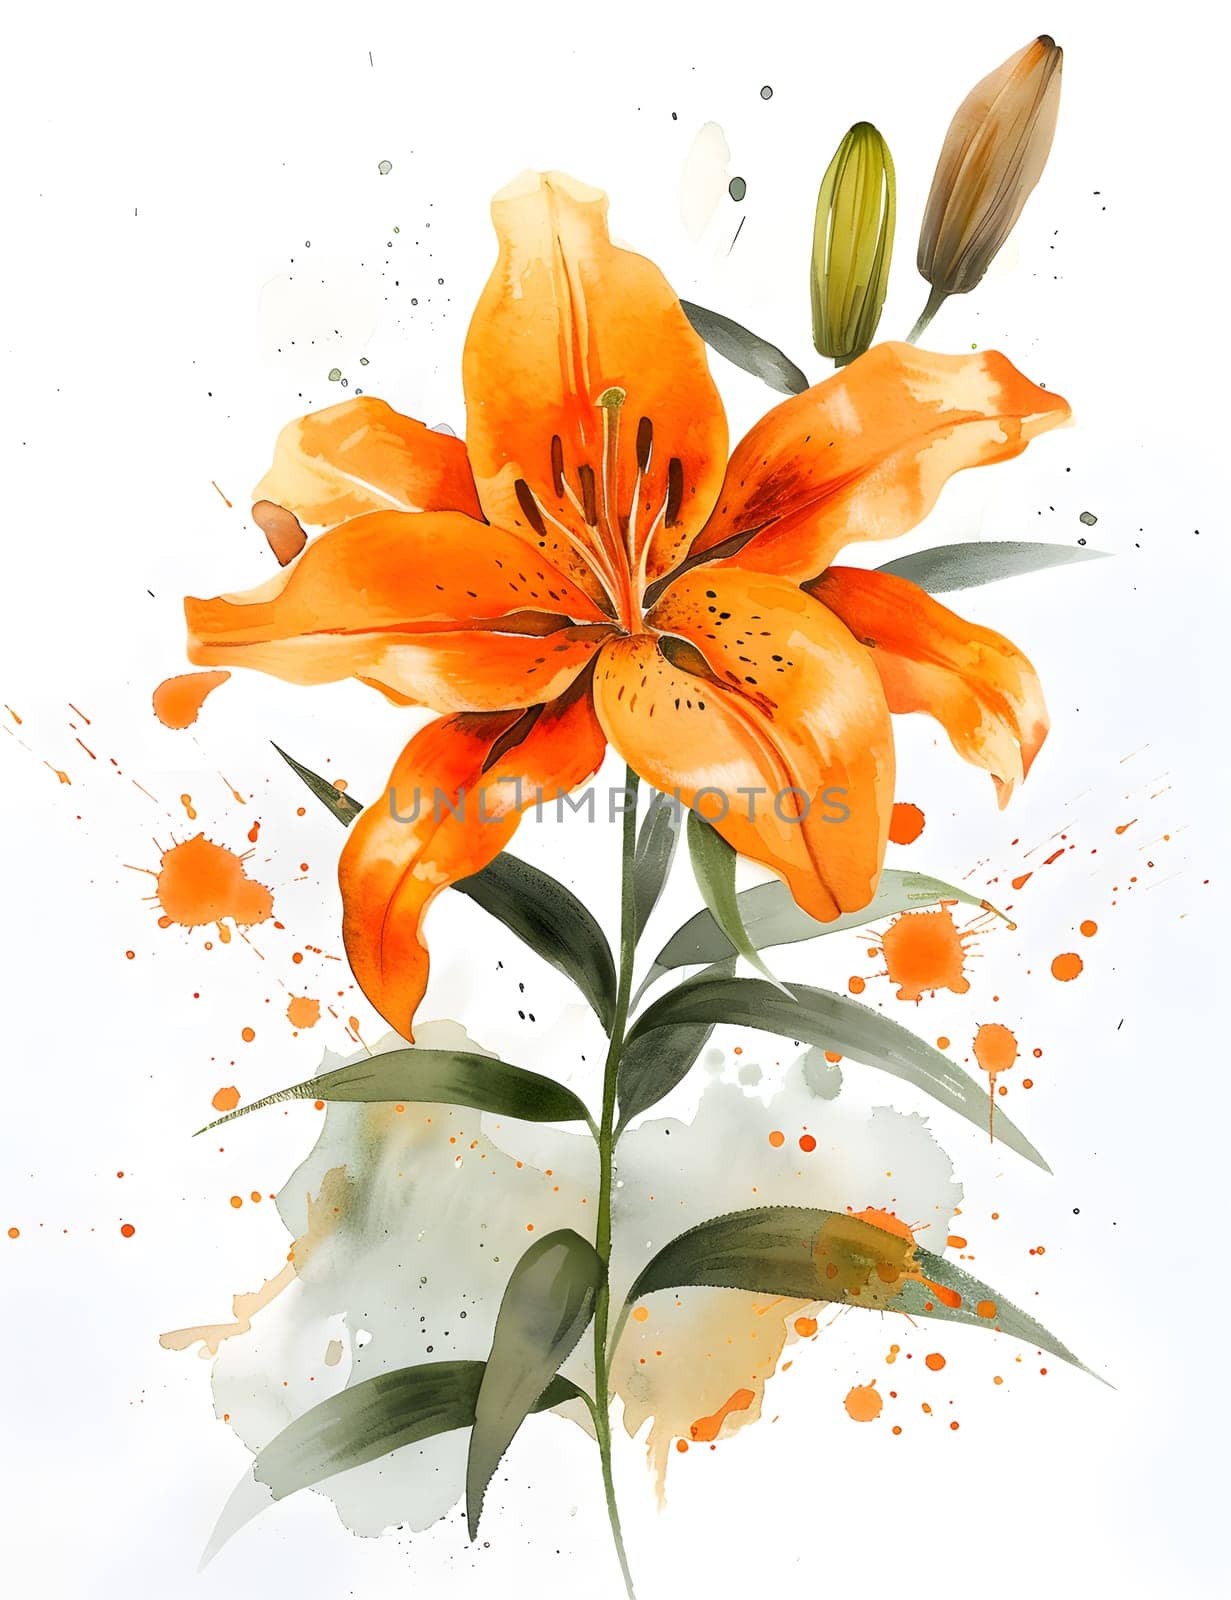 A beautiful watercolor painting capturing the vibrant colors of an orange lily with green leaves on a white background, showcasing the intricate details of this flowering plant in stunning art